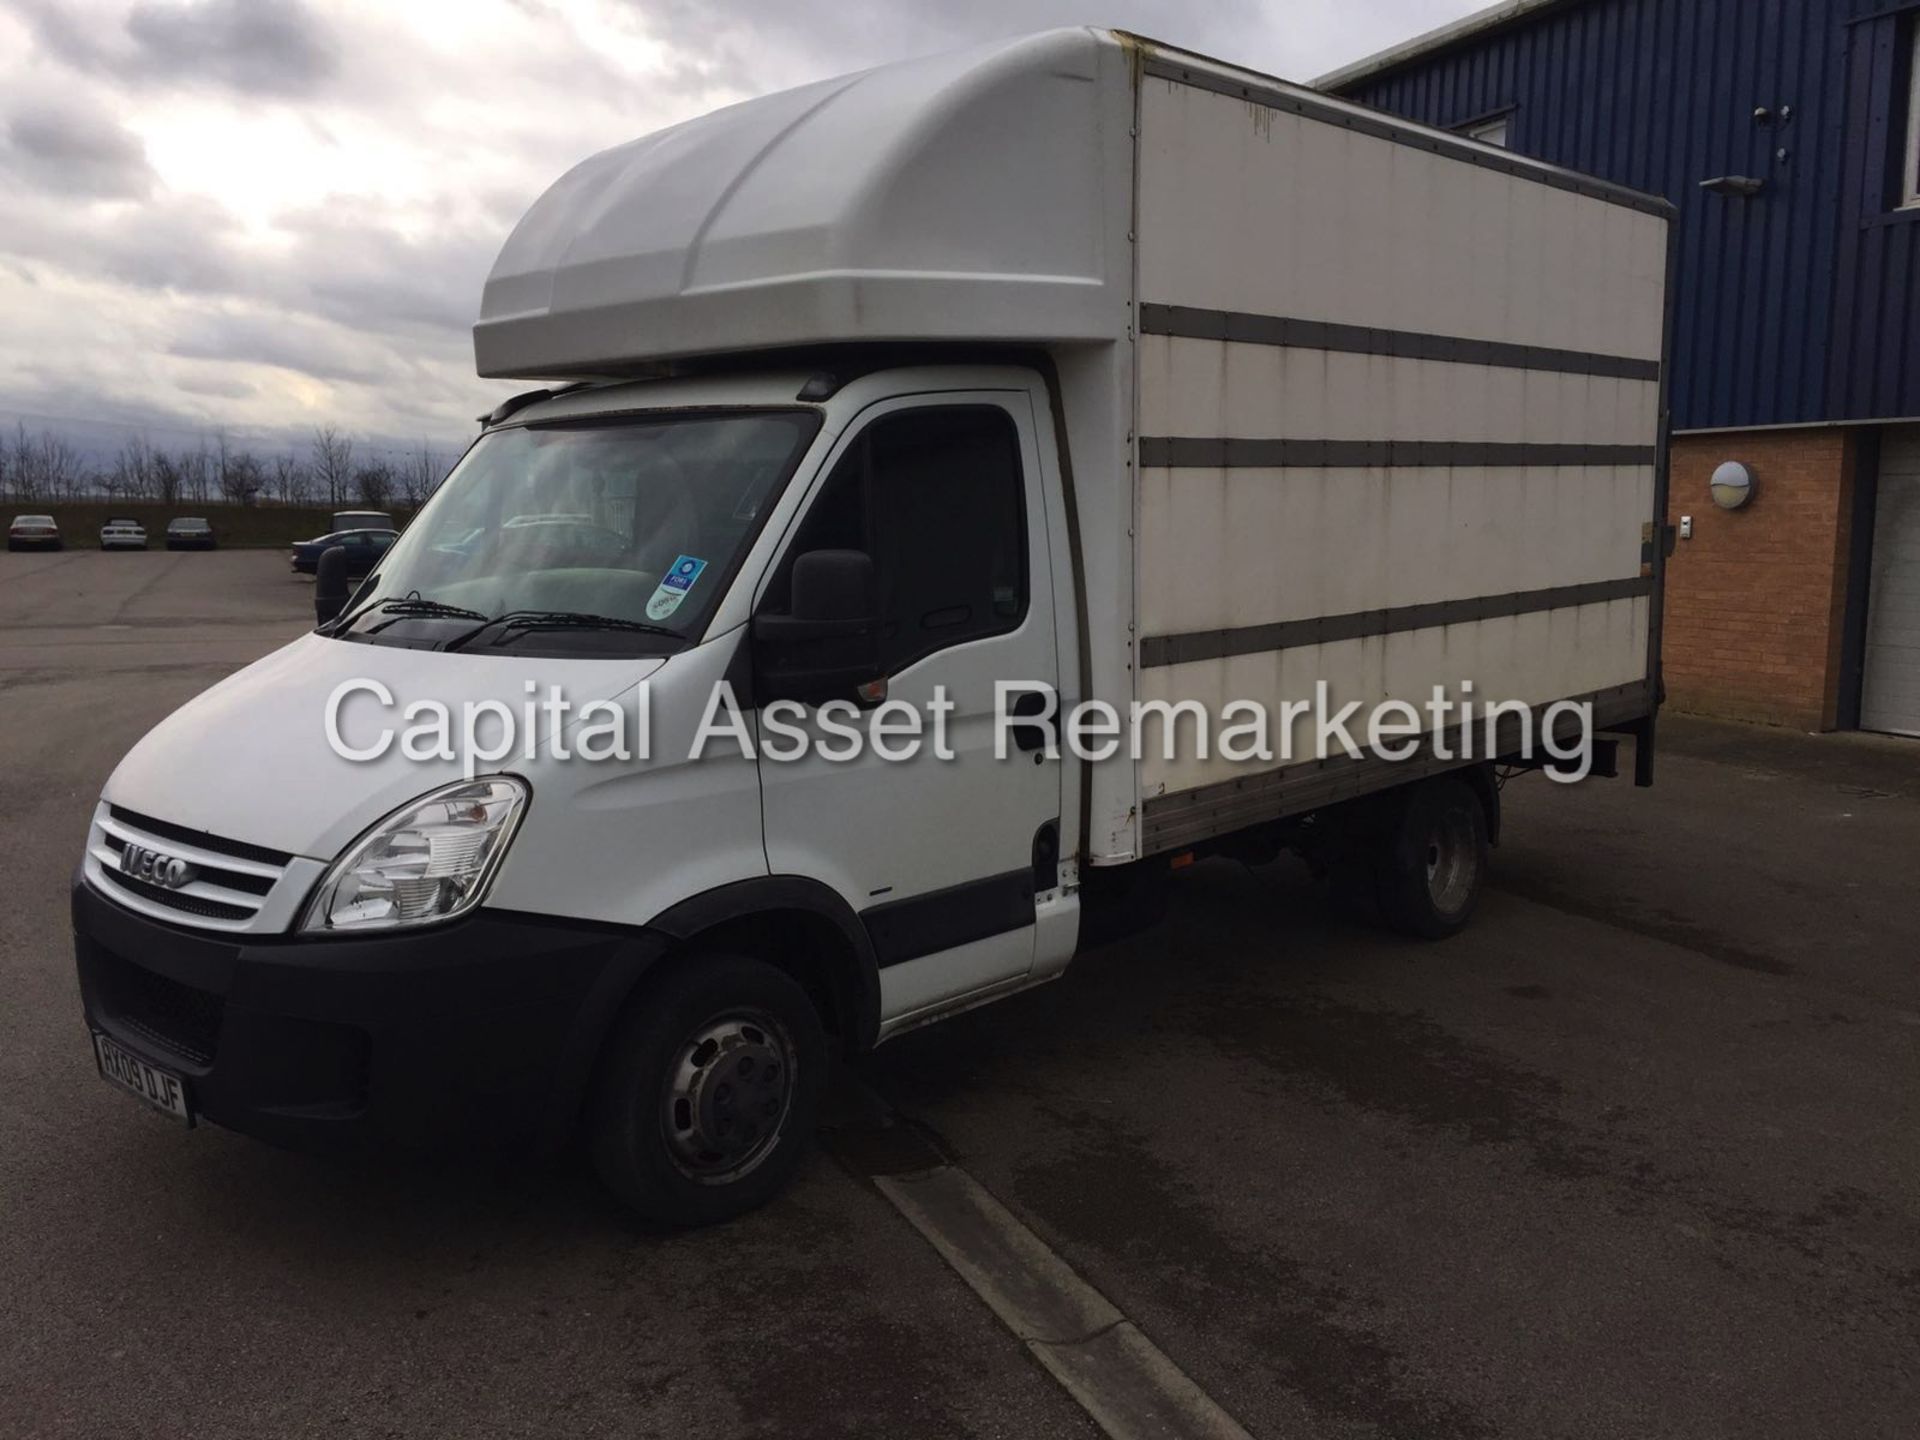 IVECO DAILY 35C12 'LWB - LUTON' (2009) 2.3 HPI - 120 BHP - CRUISE CONTROL "ELECTRIC TAIL-LIFT" - Image 2 of 14